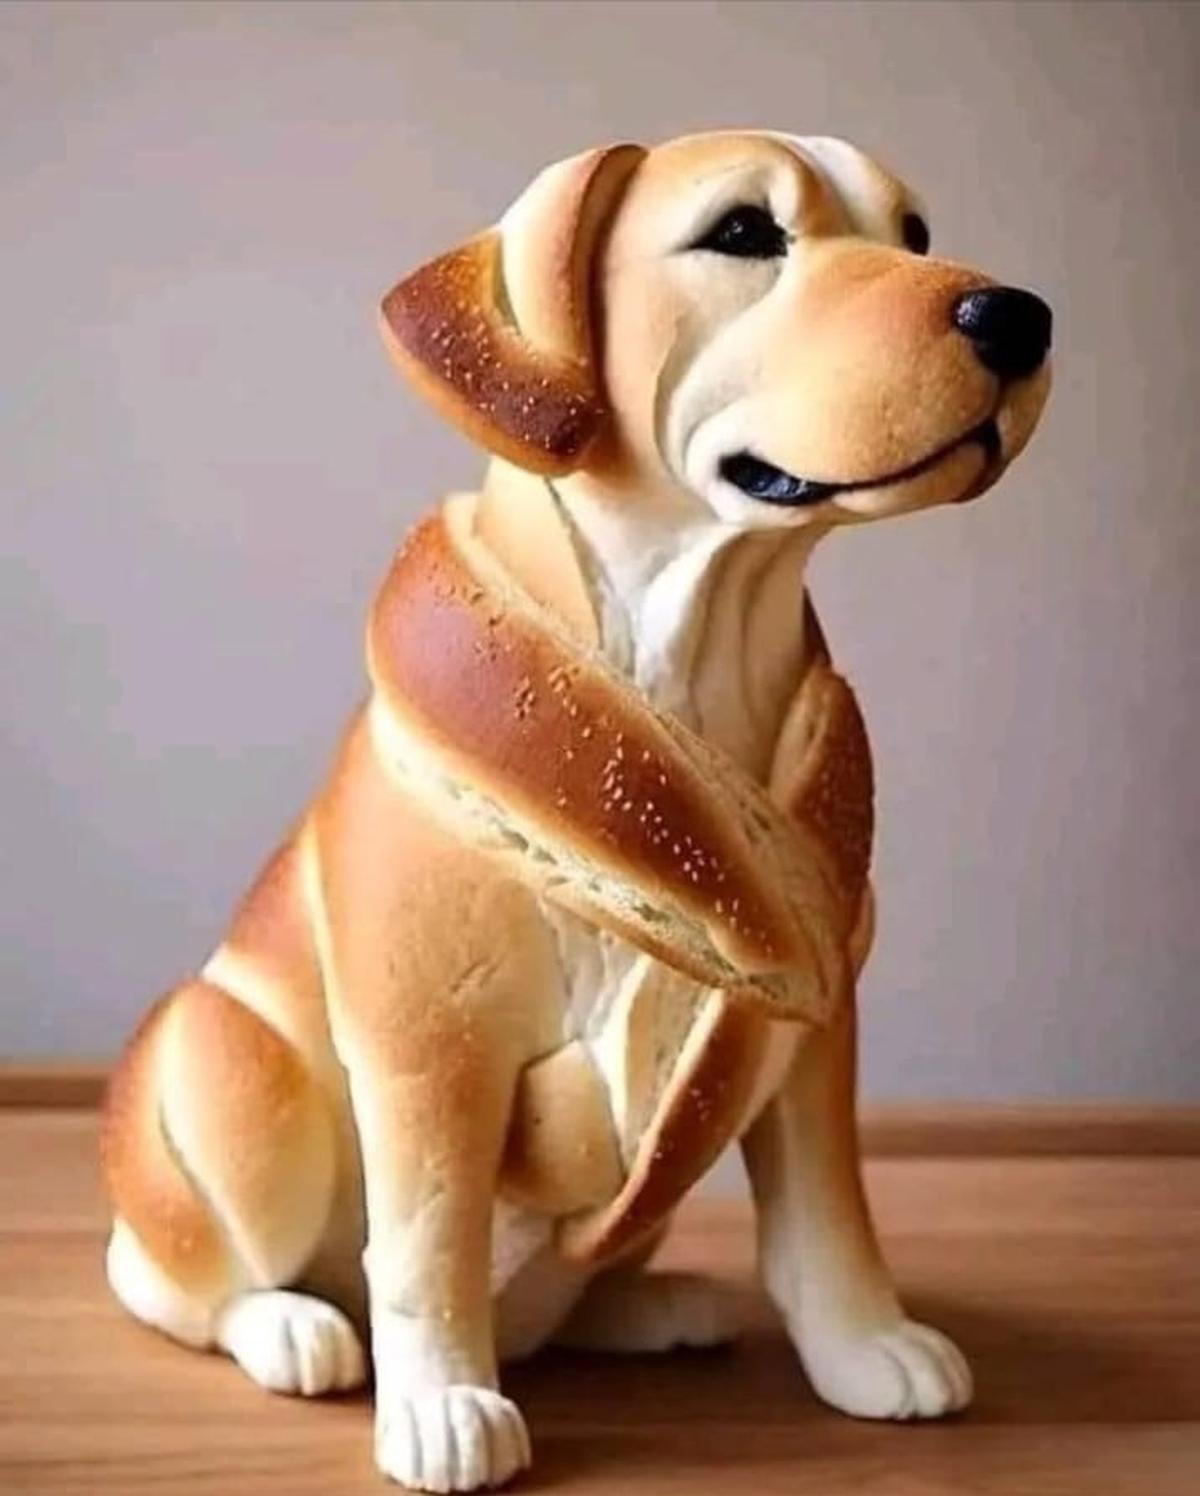 An ornamental salt dough bread baked in the shape of a dog by chef Kaleeswaran.